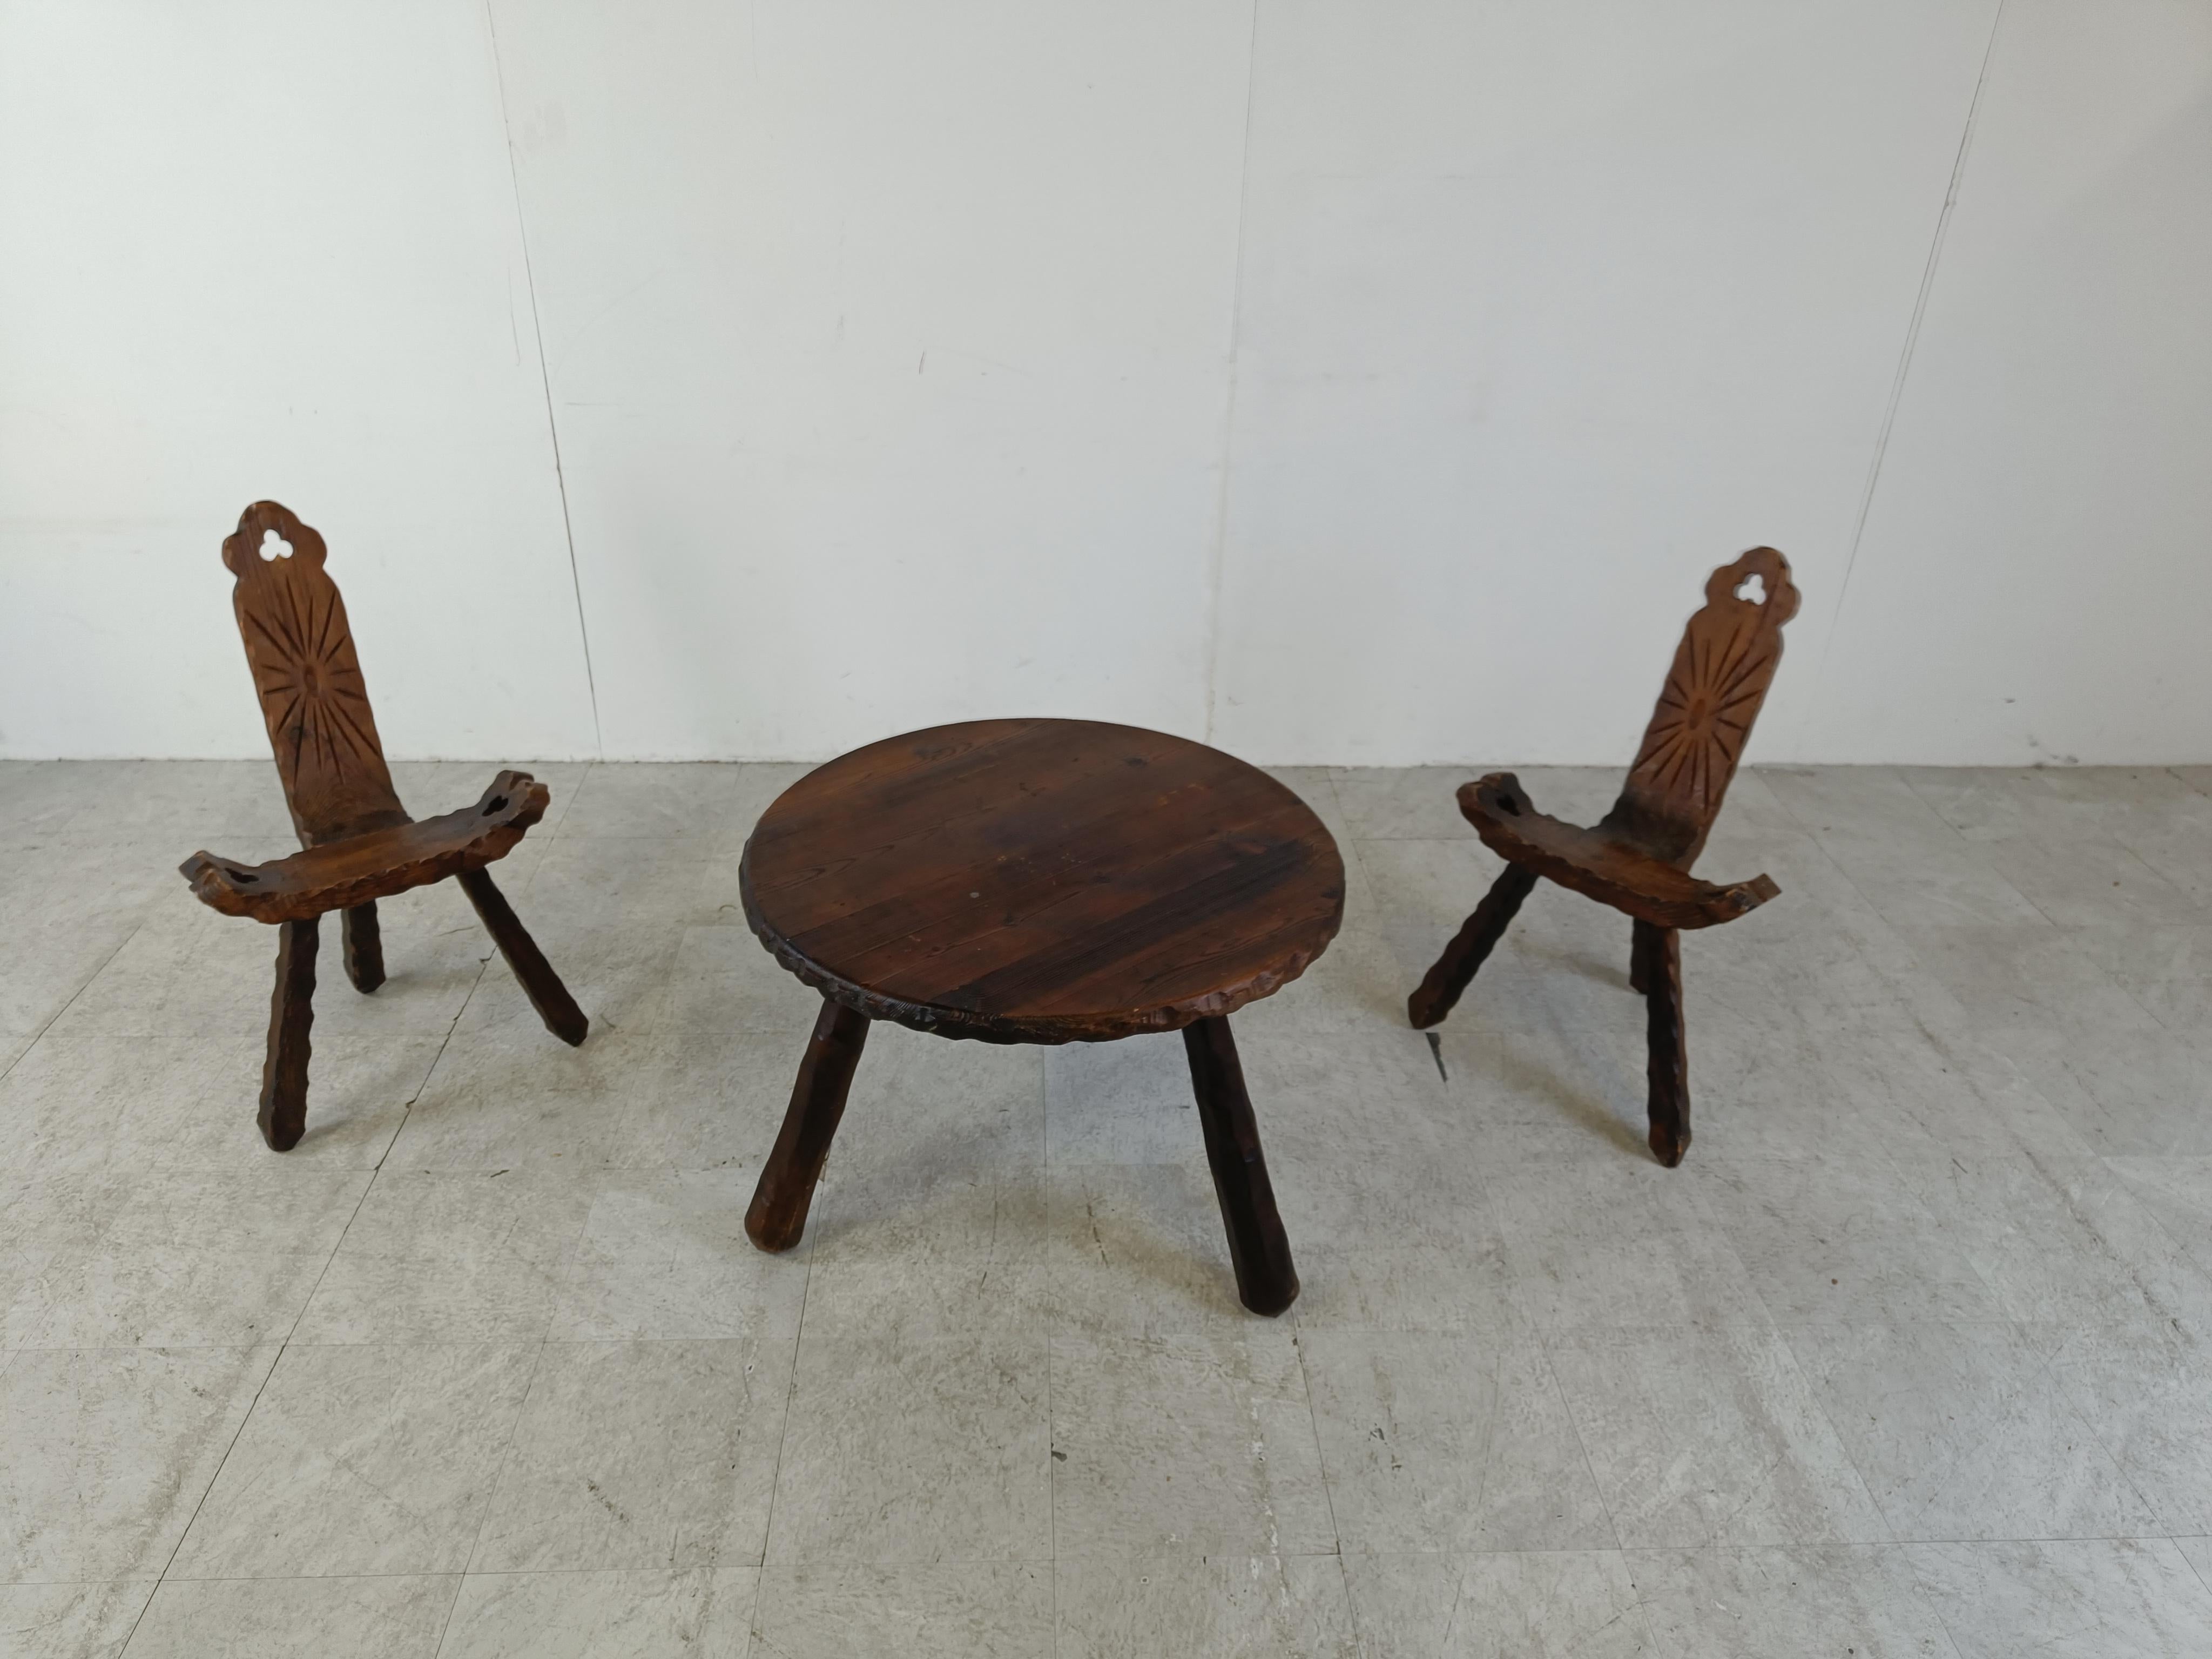 Authentic spanish brutalist wooden stools with table.

The chairs are nicely crafted with the solid wooden legs screwing into place.

Rare to find a set with matching table.

Great decorative pieces

1950s - Spain

Dimensions:
Chairs:
Height: